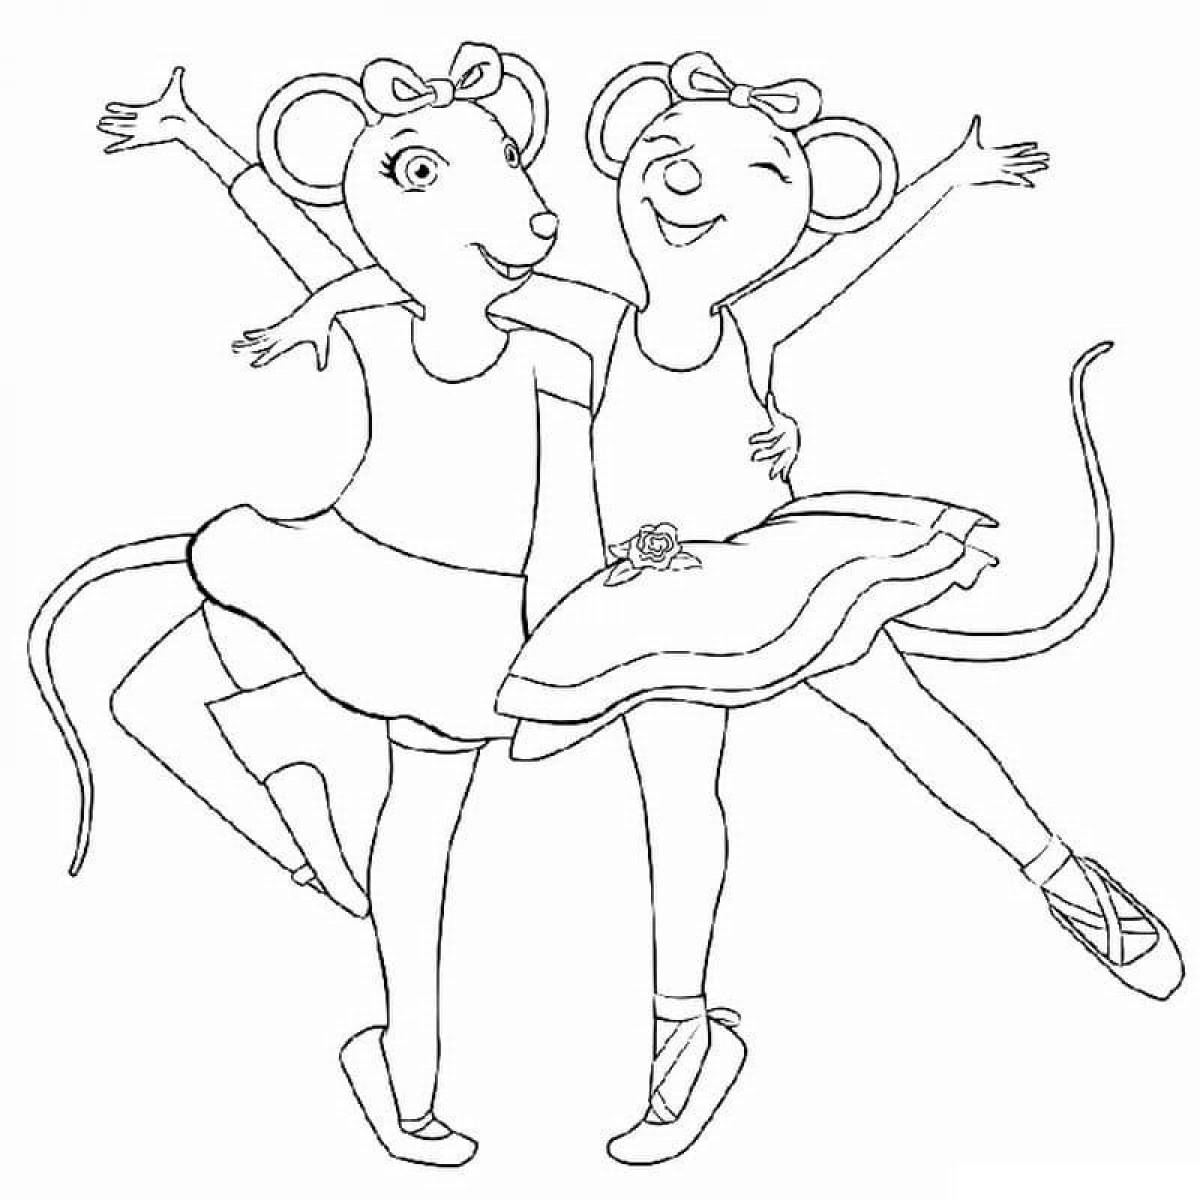 Festive ballerina coloring pages for kids